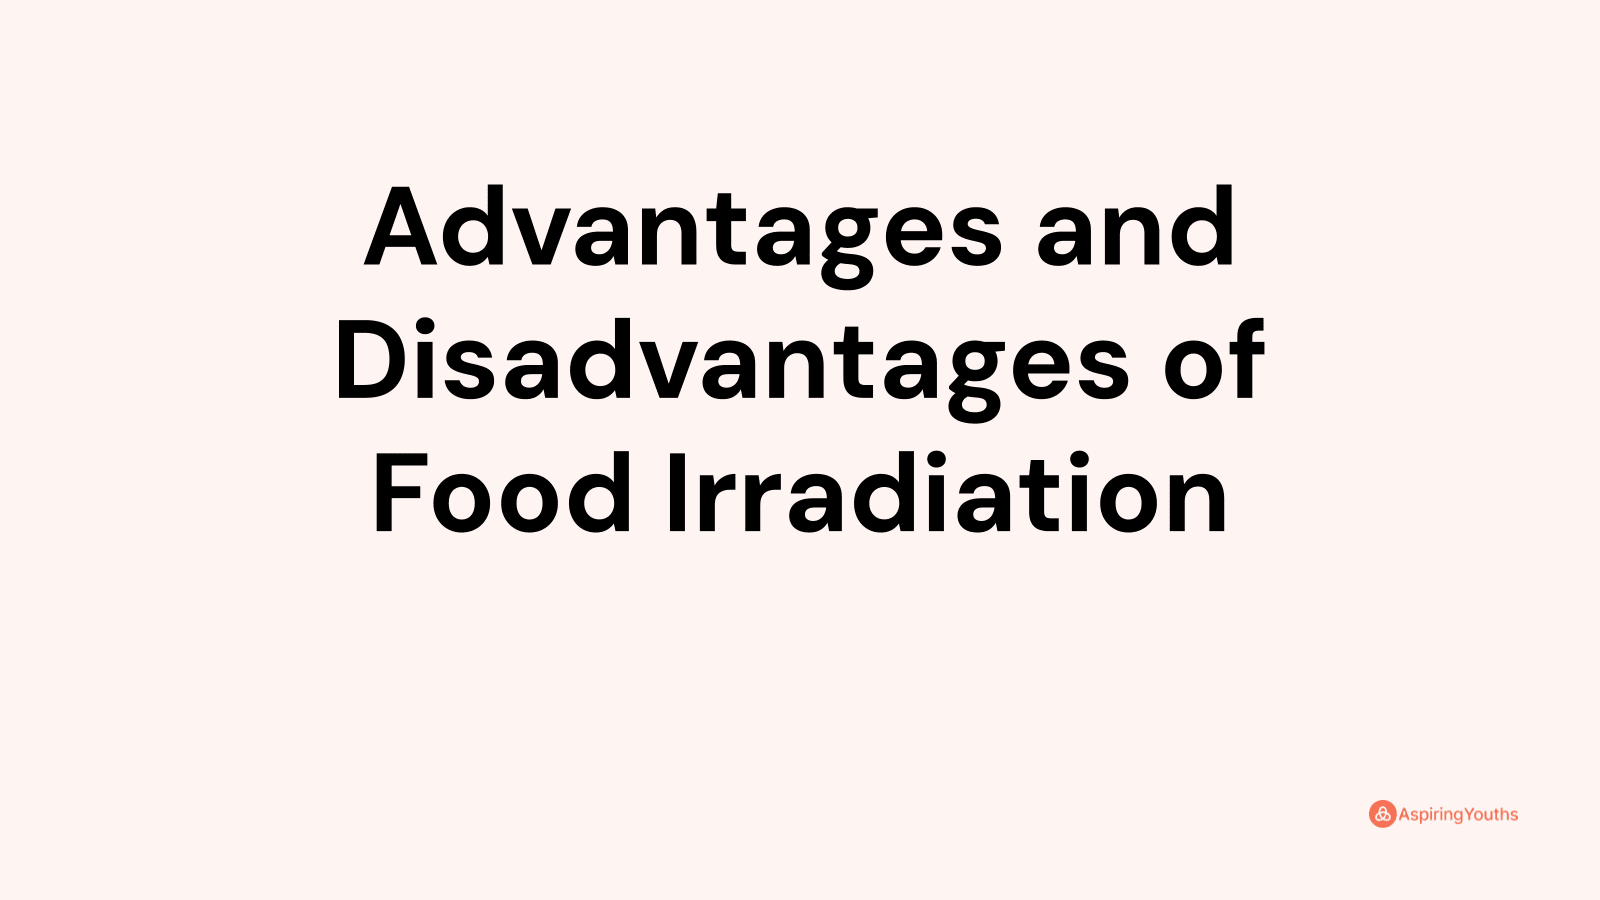 Advantages and disadvantages of Food Irradiation